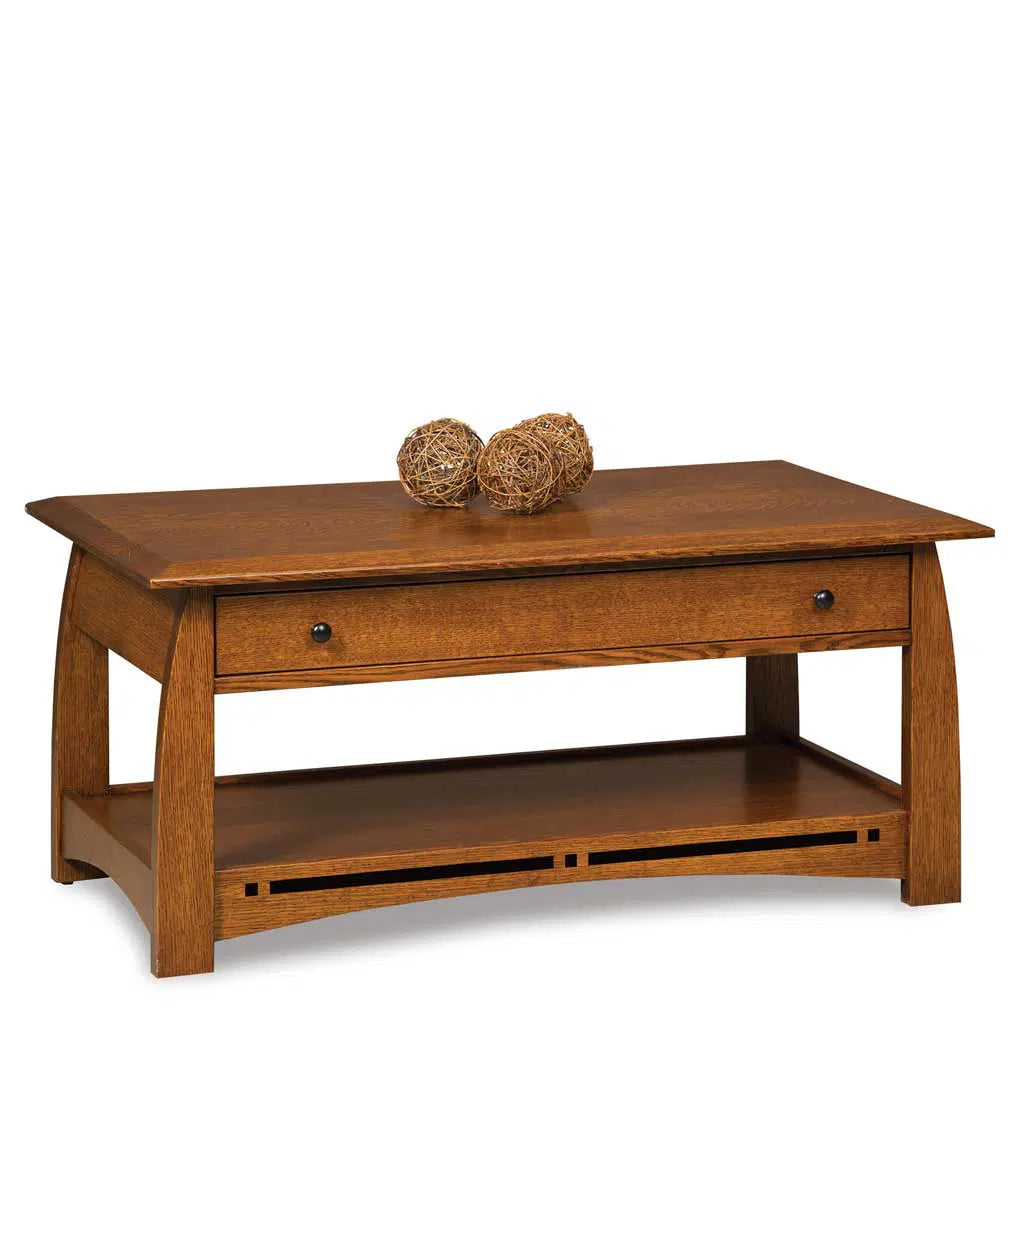 Amish Boulder Creek Open Coffee Table with Drawer